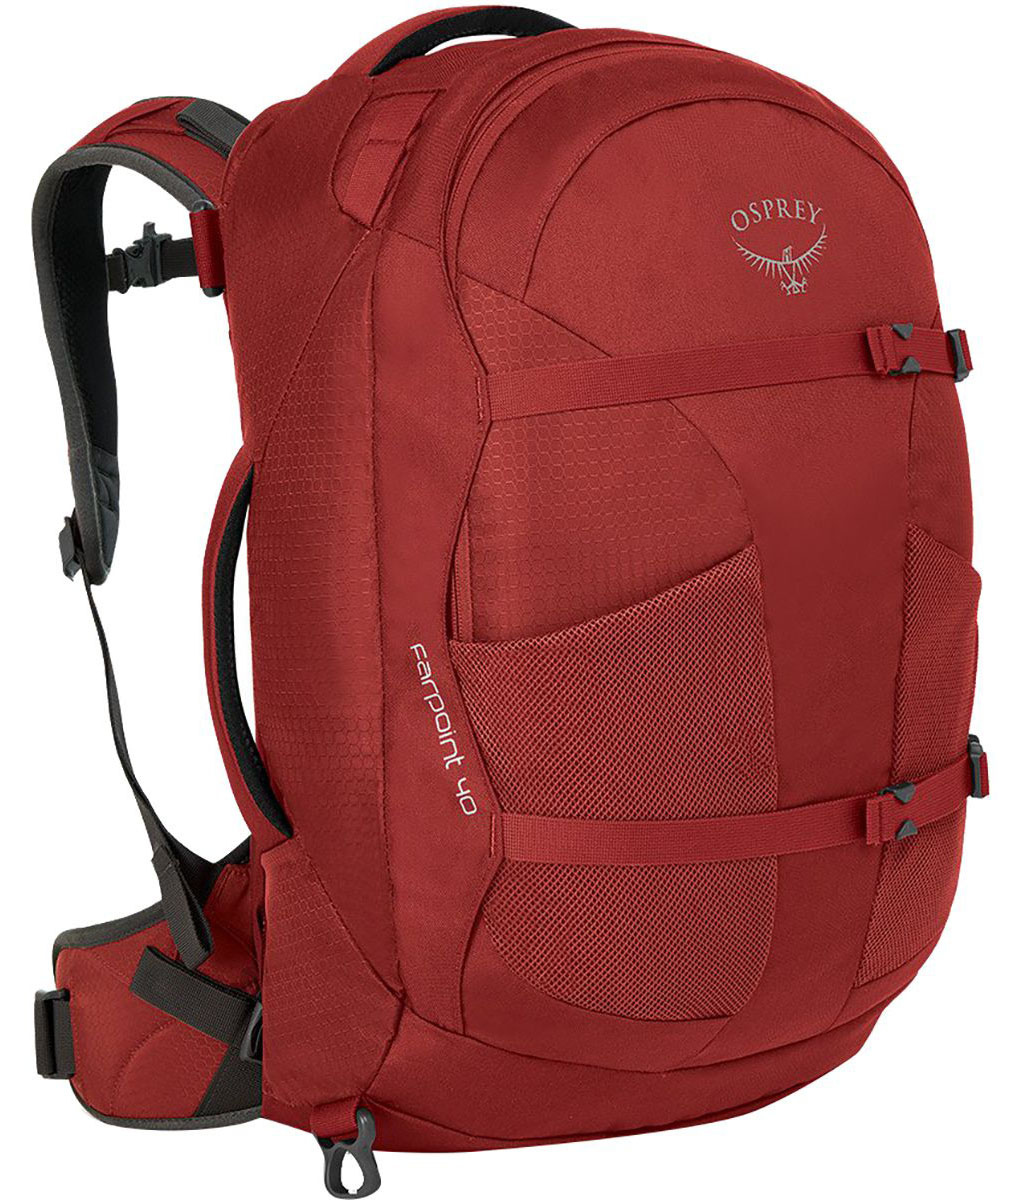 Osprey Farpoint 40 travel backpack